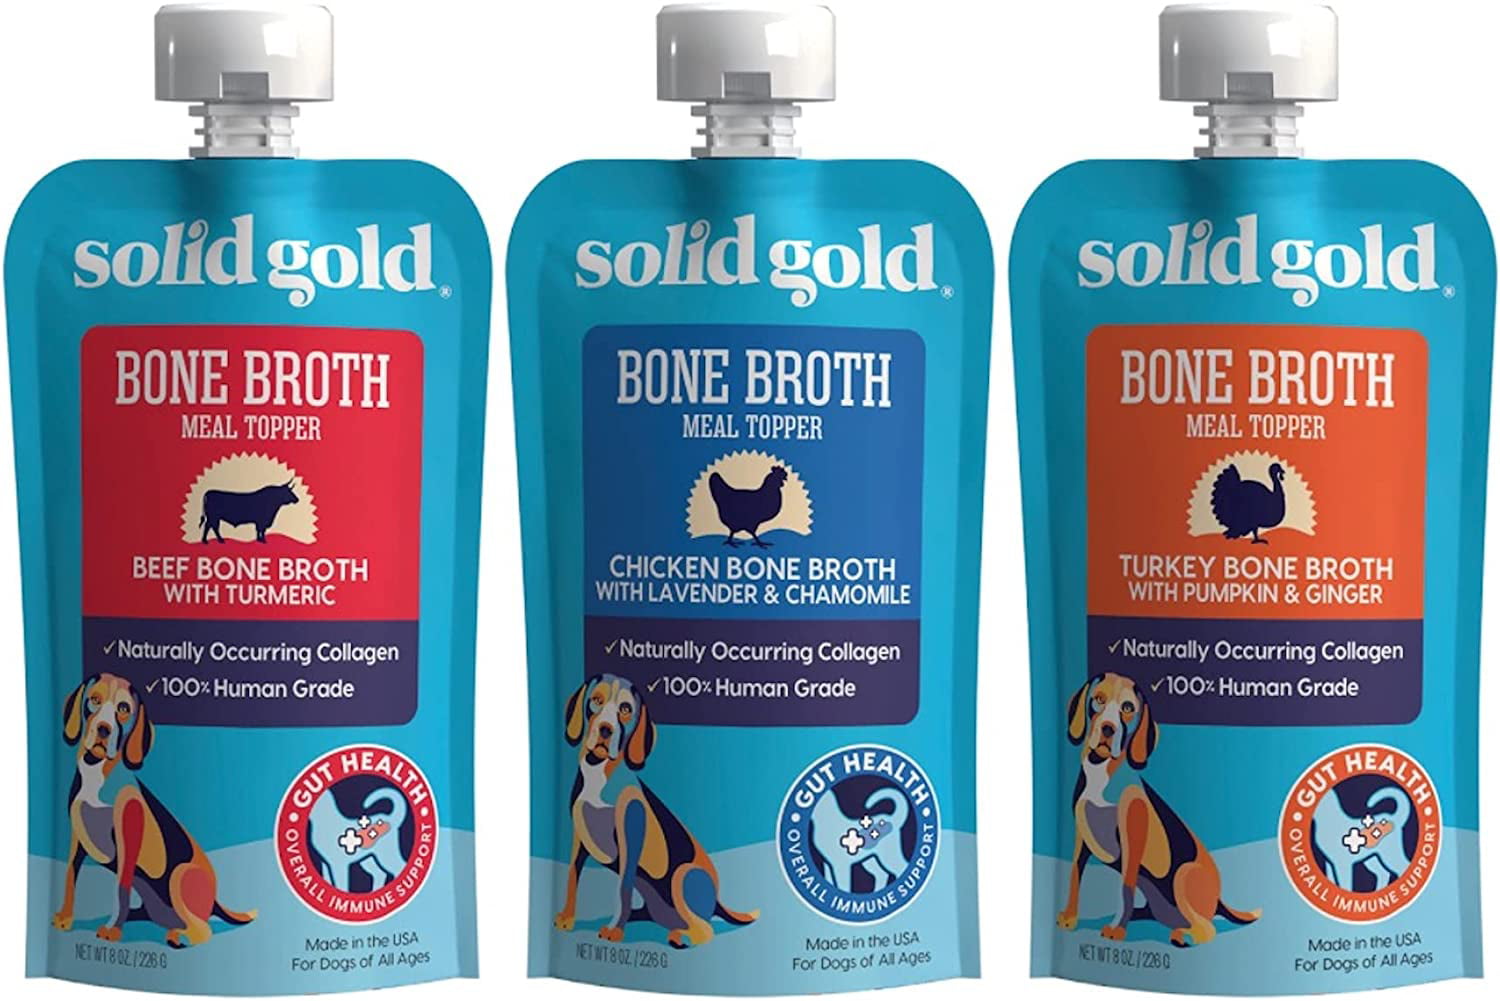 Grain-Free Meal topper and Treat Great for Picky Eaters Human-Grade Bone Broth For Dogs Holistic Bone Broth Natural Collagen Solid Gold 